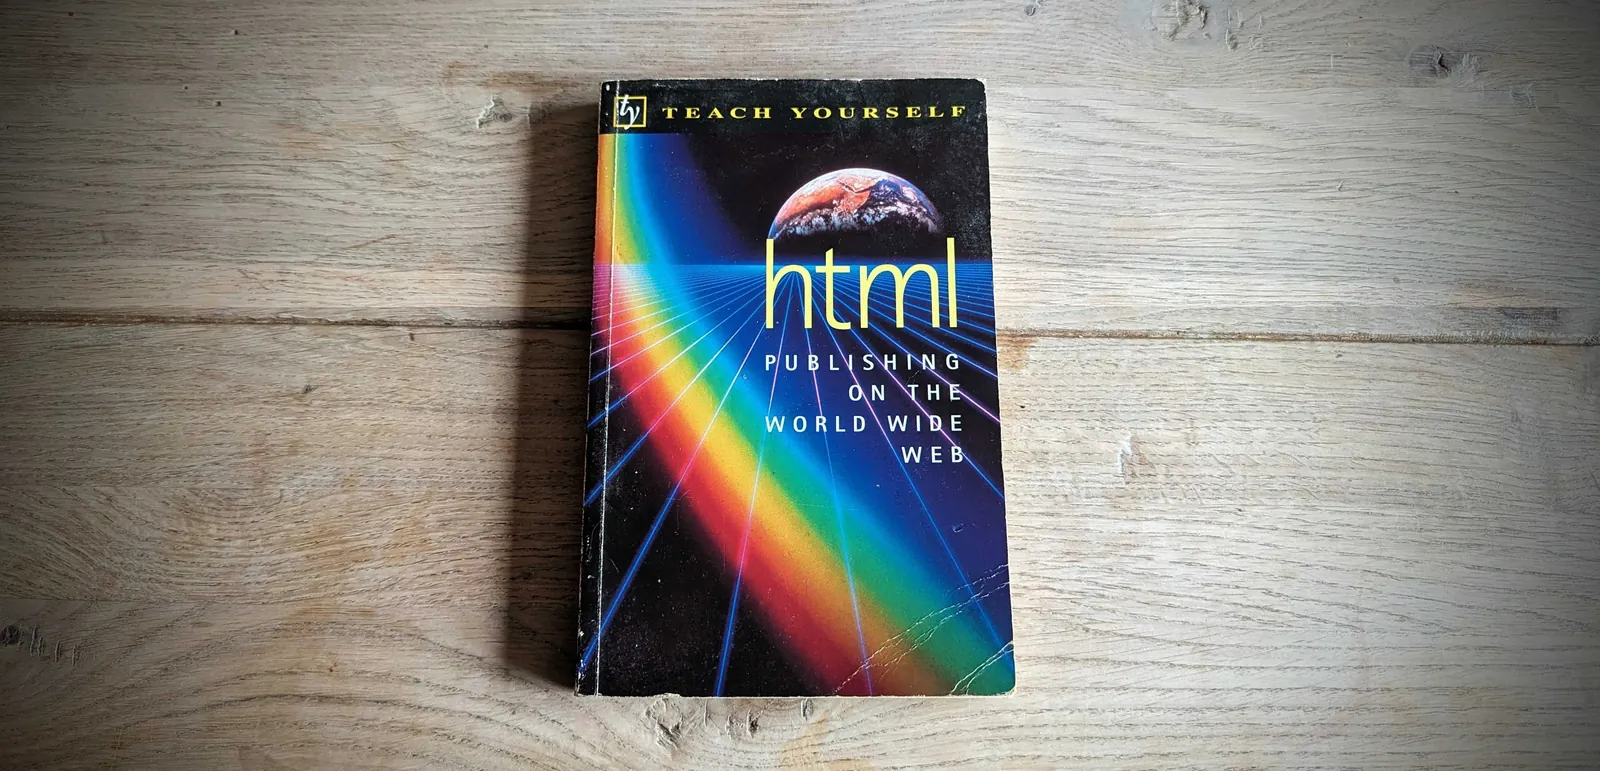 The book that sparked my software career